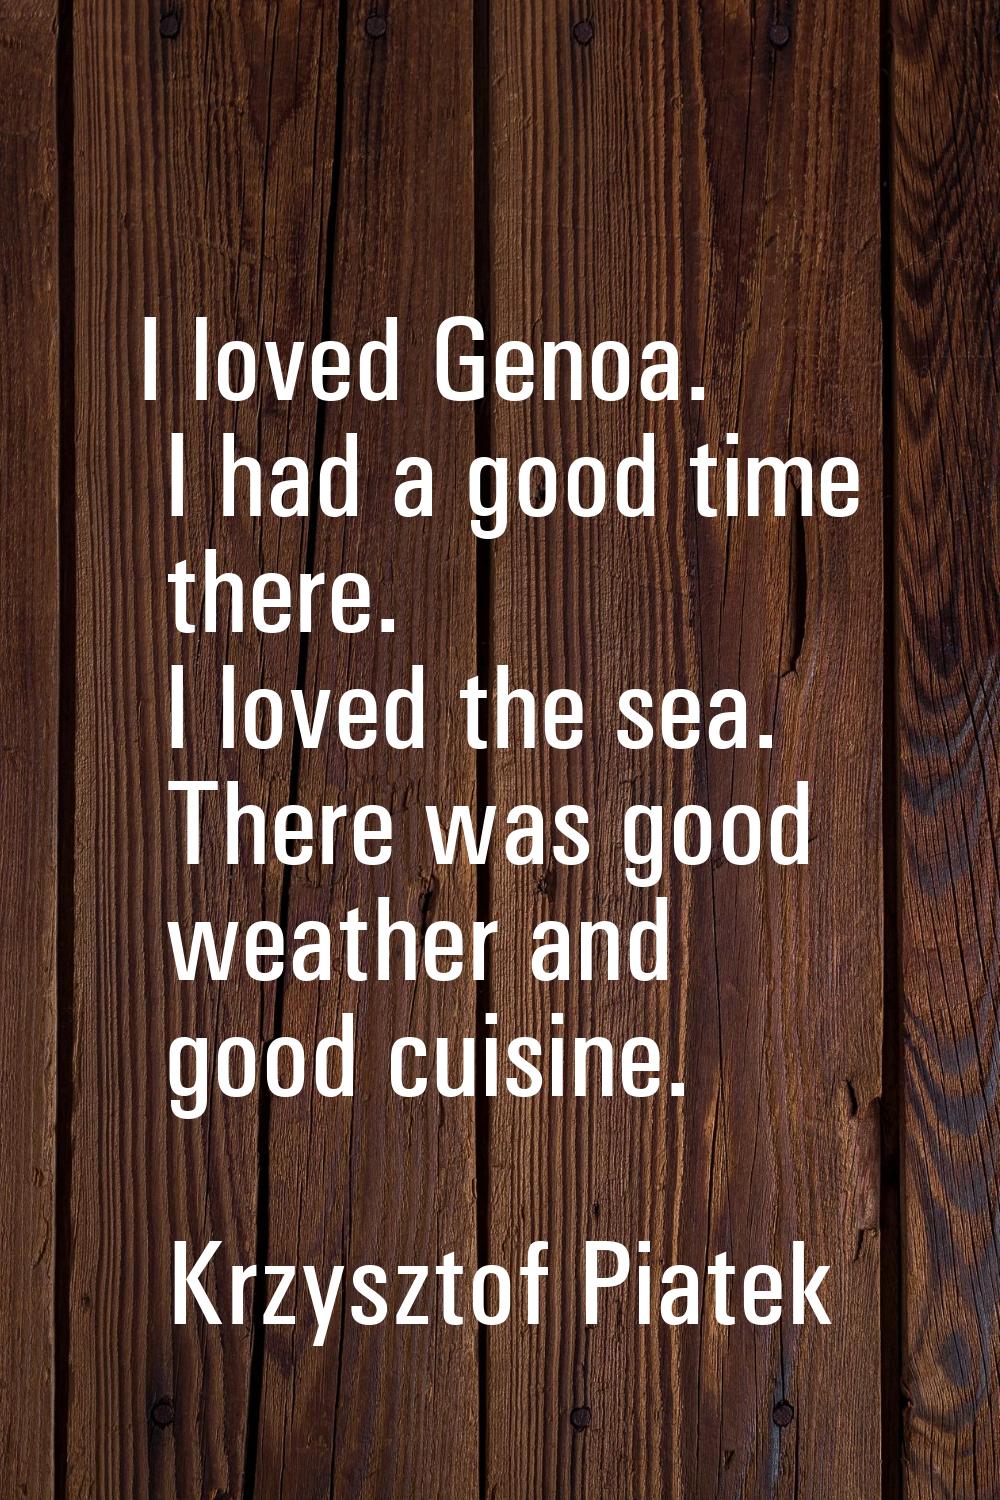 I loved Genoa. I had a good time there. I loved the sea. There was good weather and good cuisine.